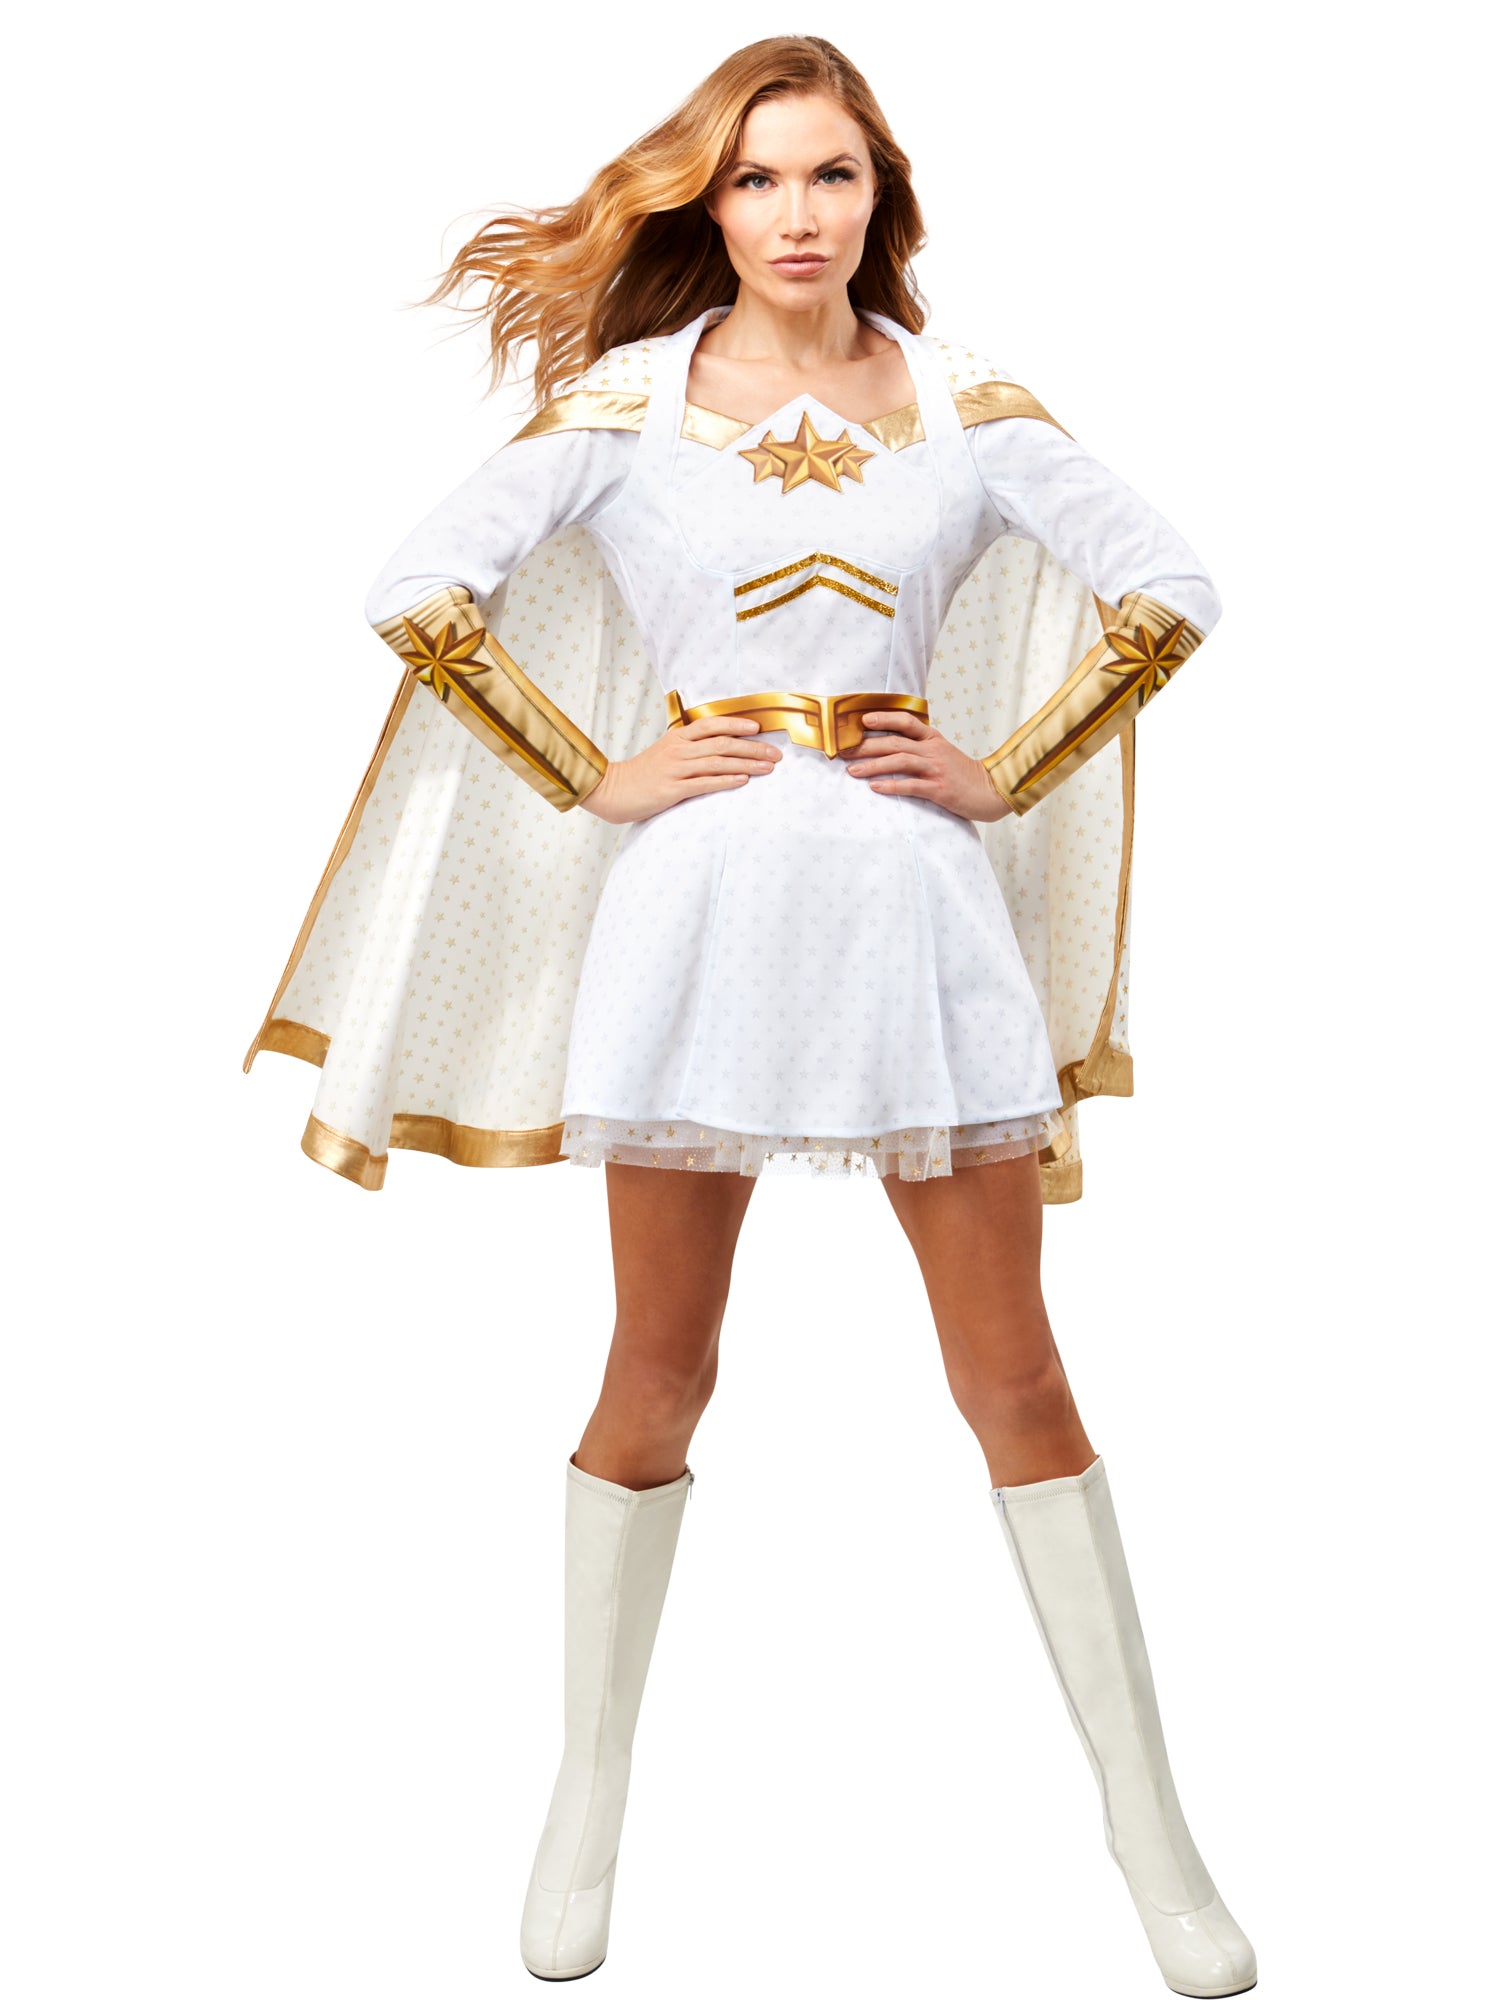 The Boys Starlight Adult Deluxe Costume - costumes.com